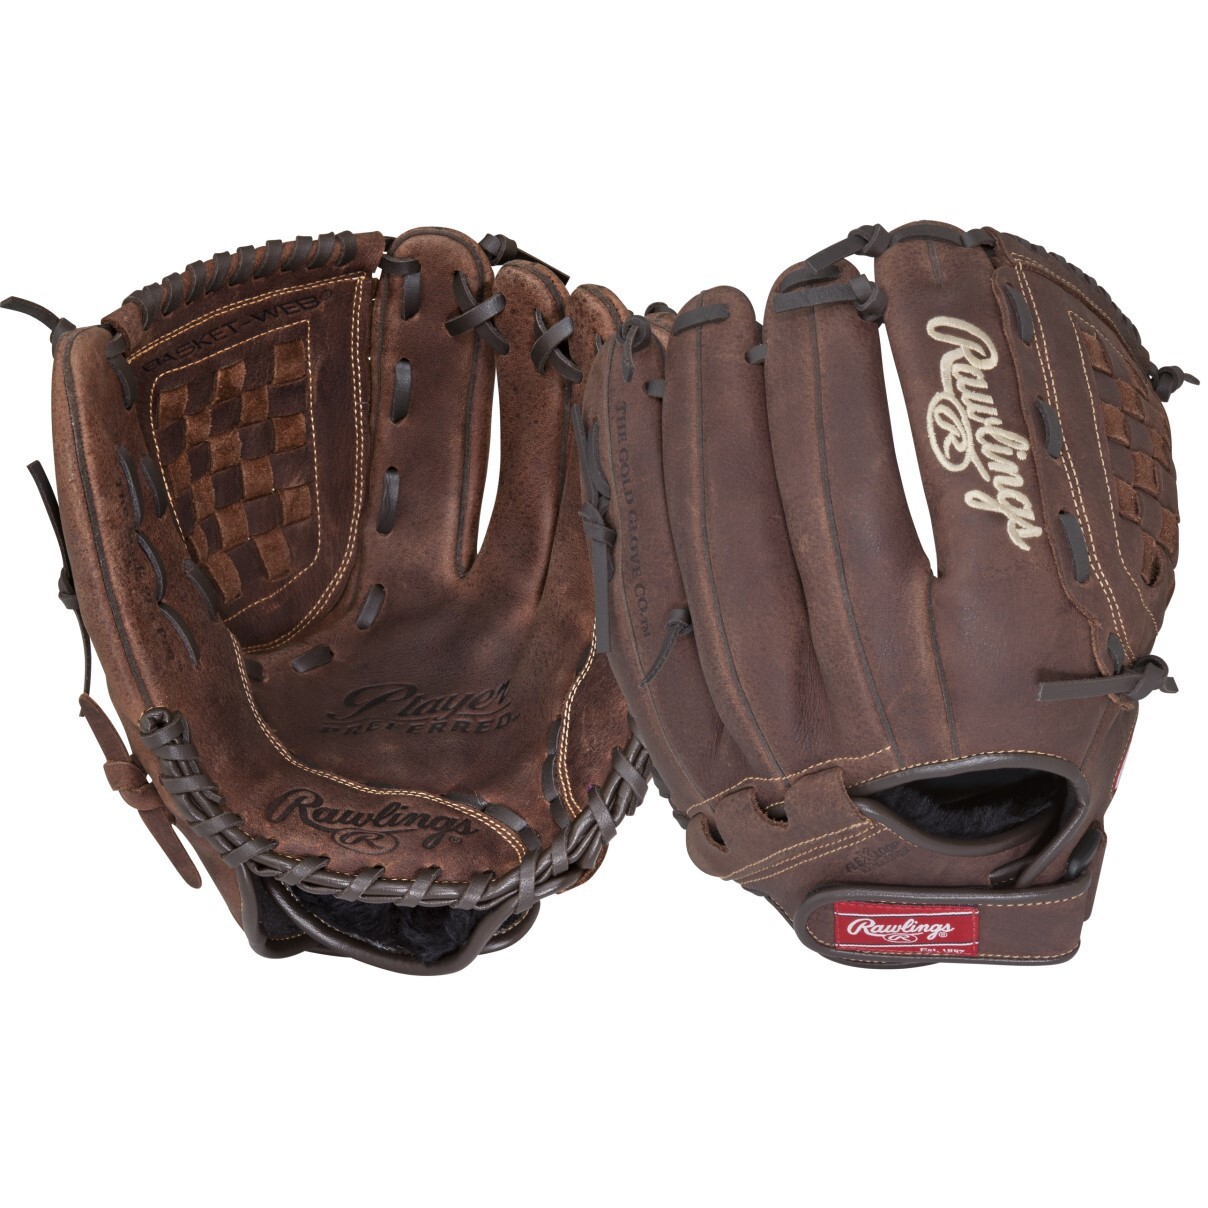 Rawlings P125bfl Player Preferred Baseball Glove 12.5 in LHT for sale online 